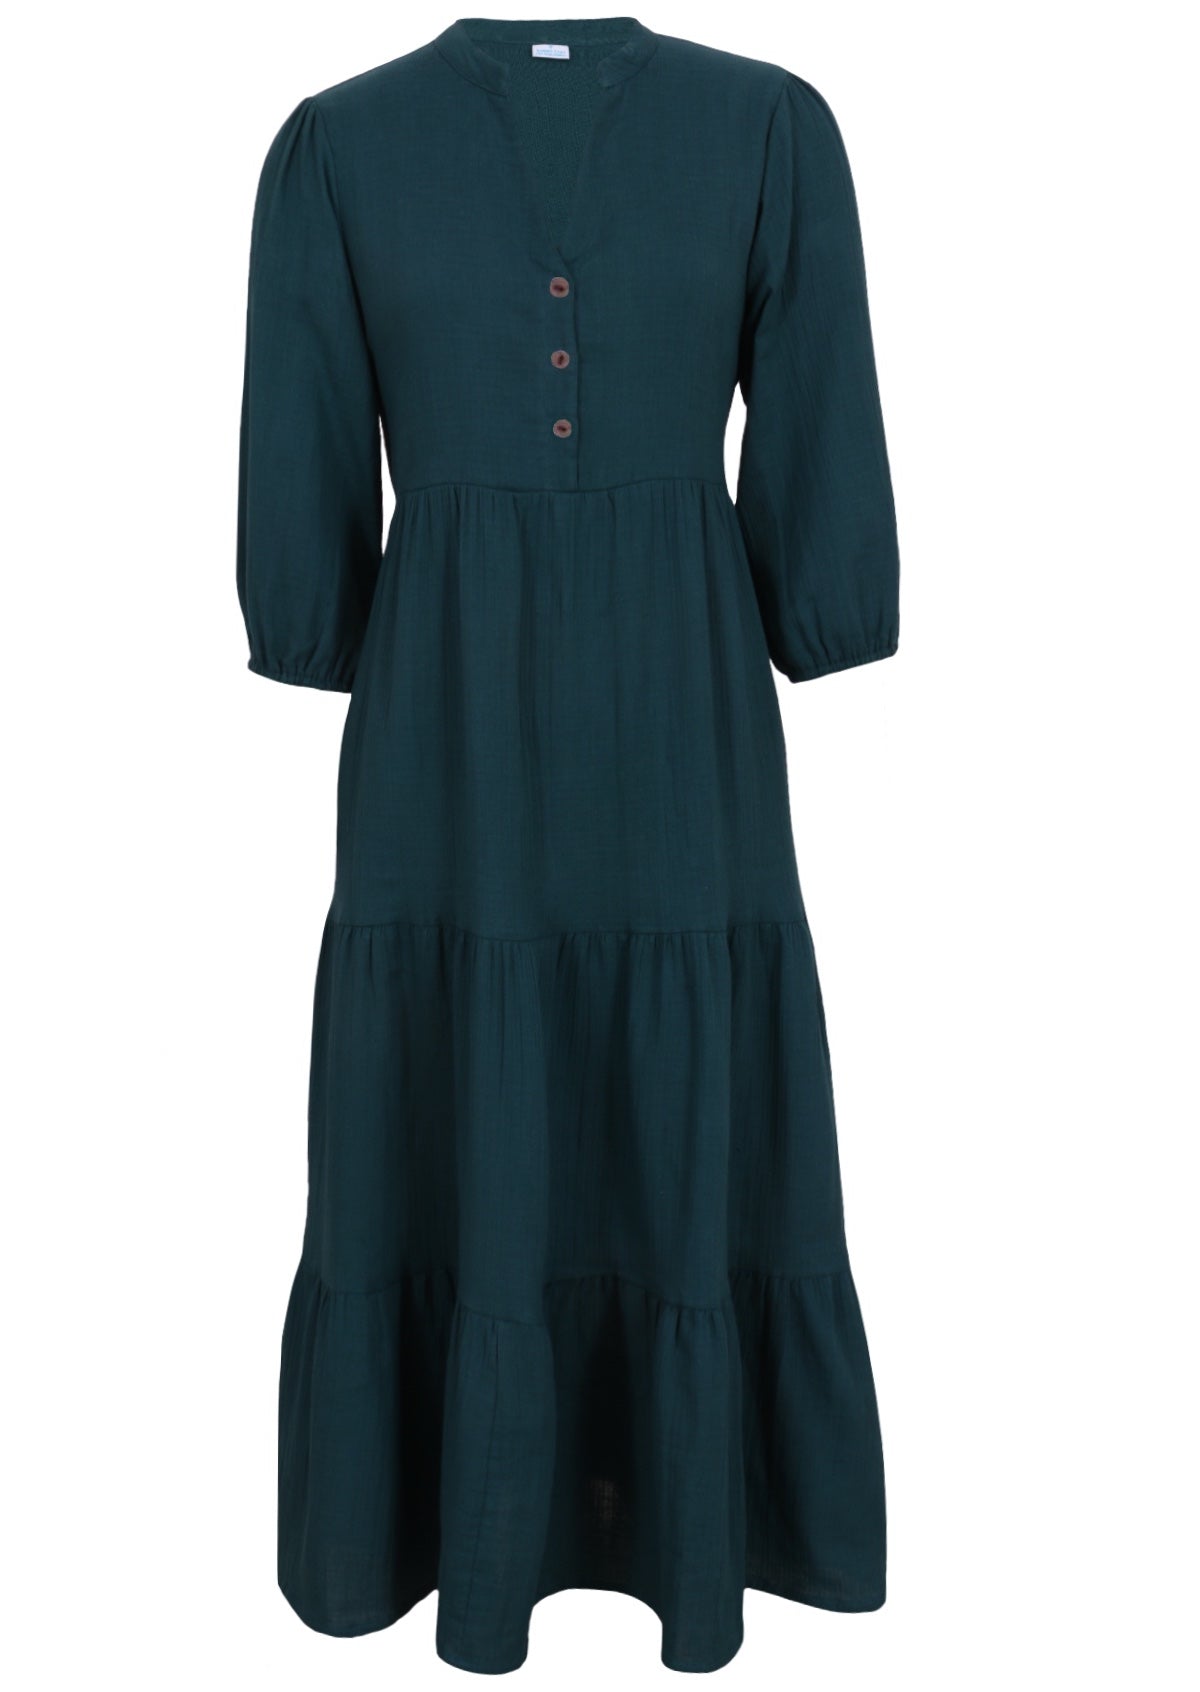 Double cotton boho tiered maxi dress with 3/4 sleeves and buttoned bodice in deep teal